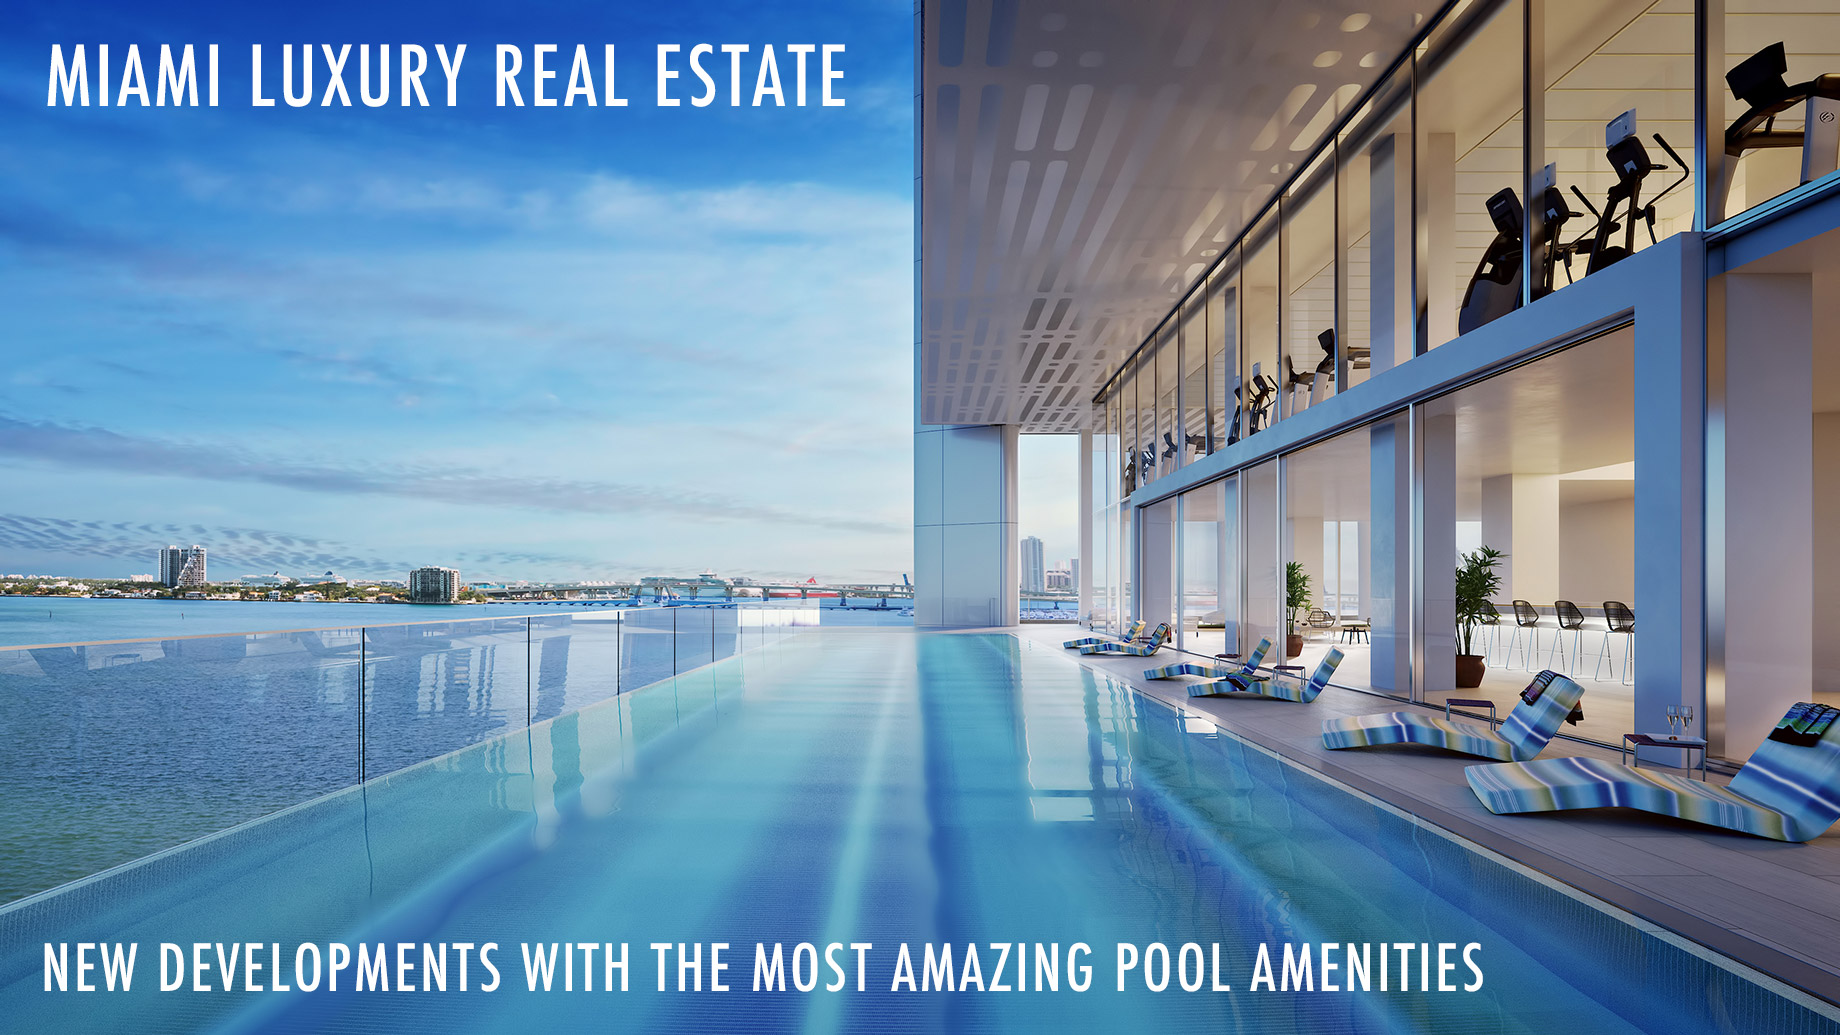 Miami Luxury Real Estate - New Developments With The Most Amazing Pool Amenities